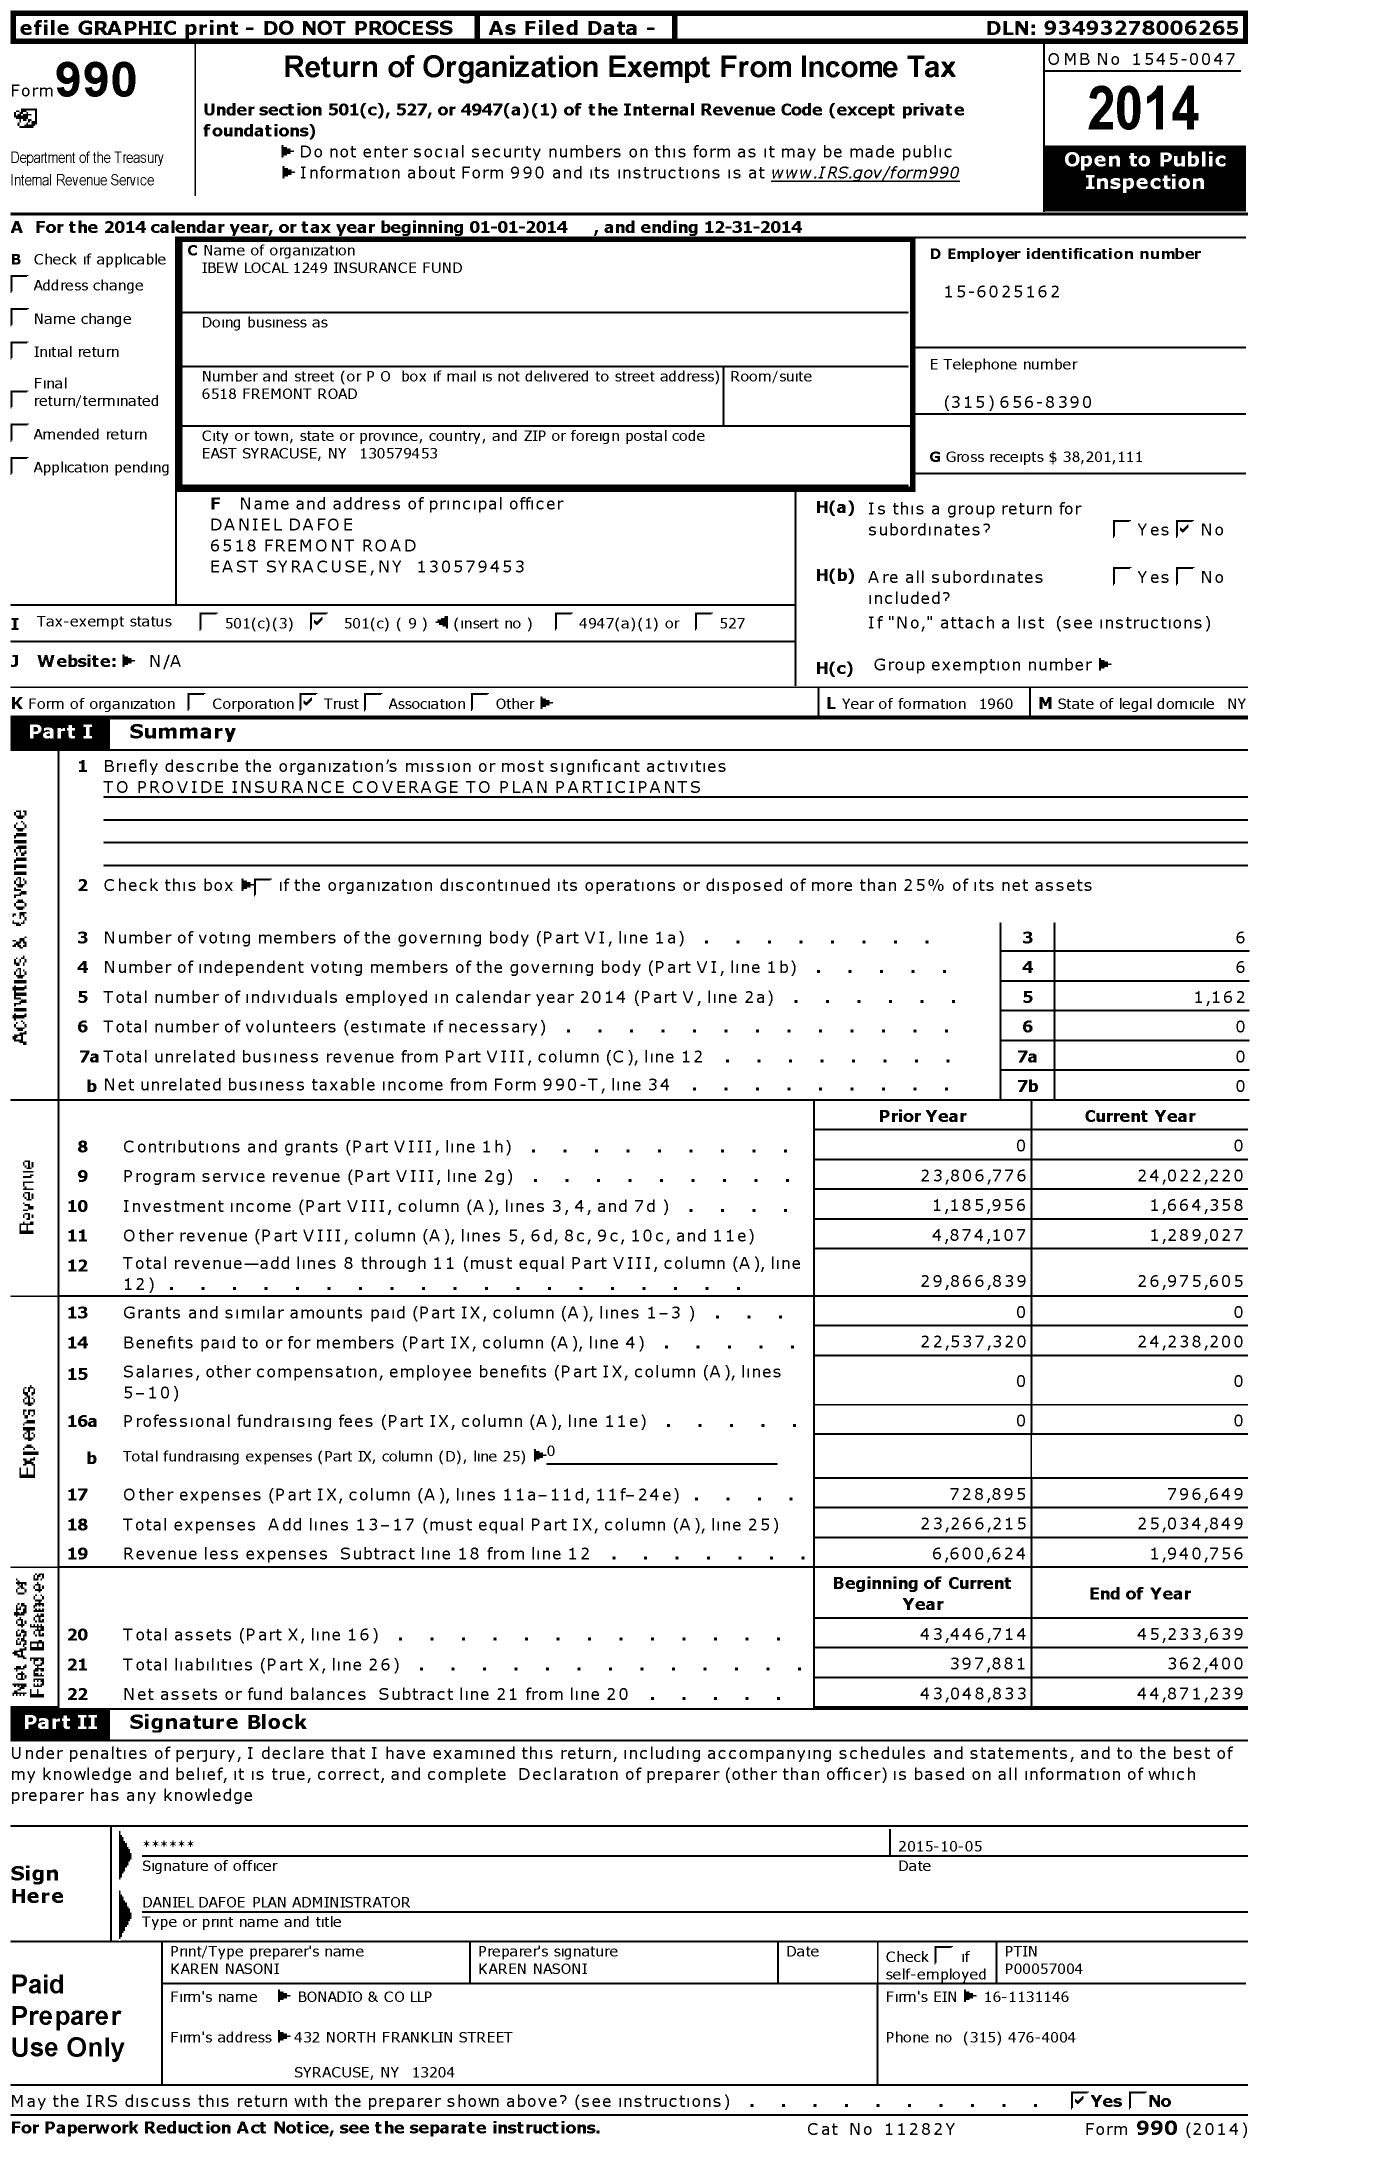 Image of first page of 2014 Form 990O for IBEW Local 1249 Insurance Fund